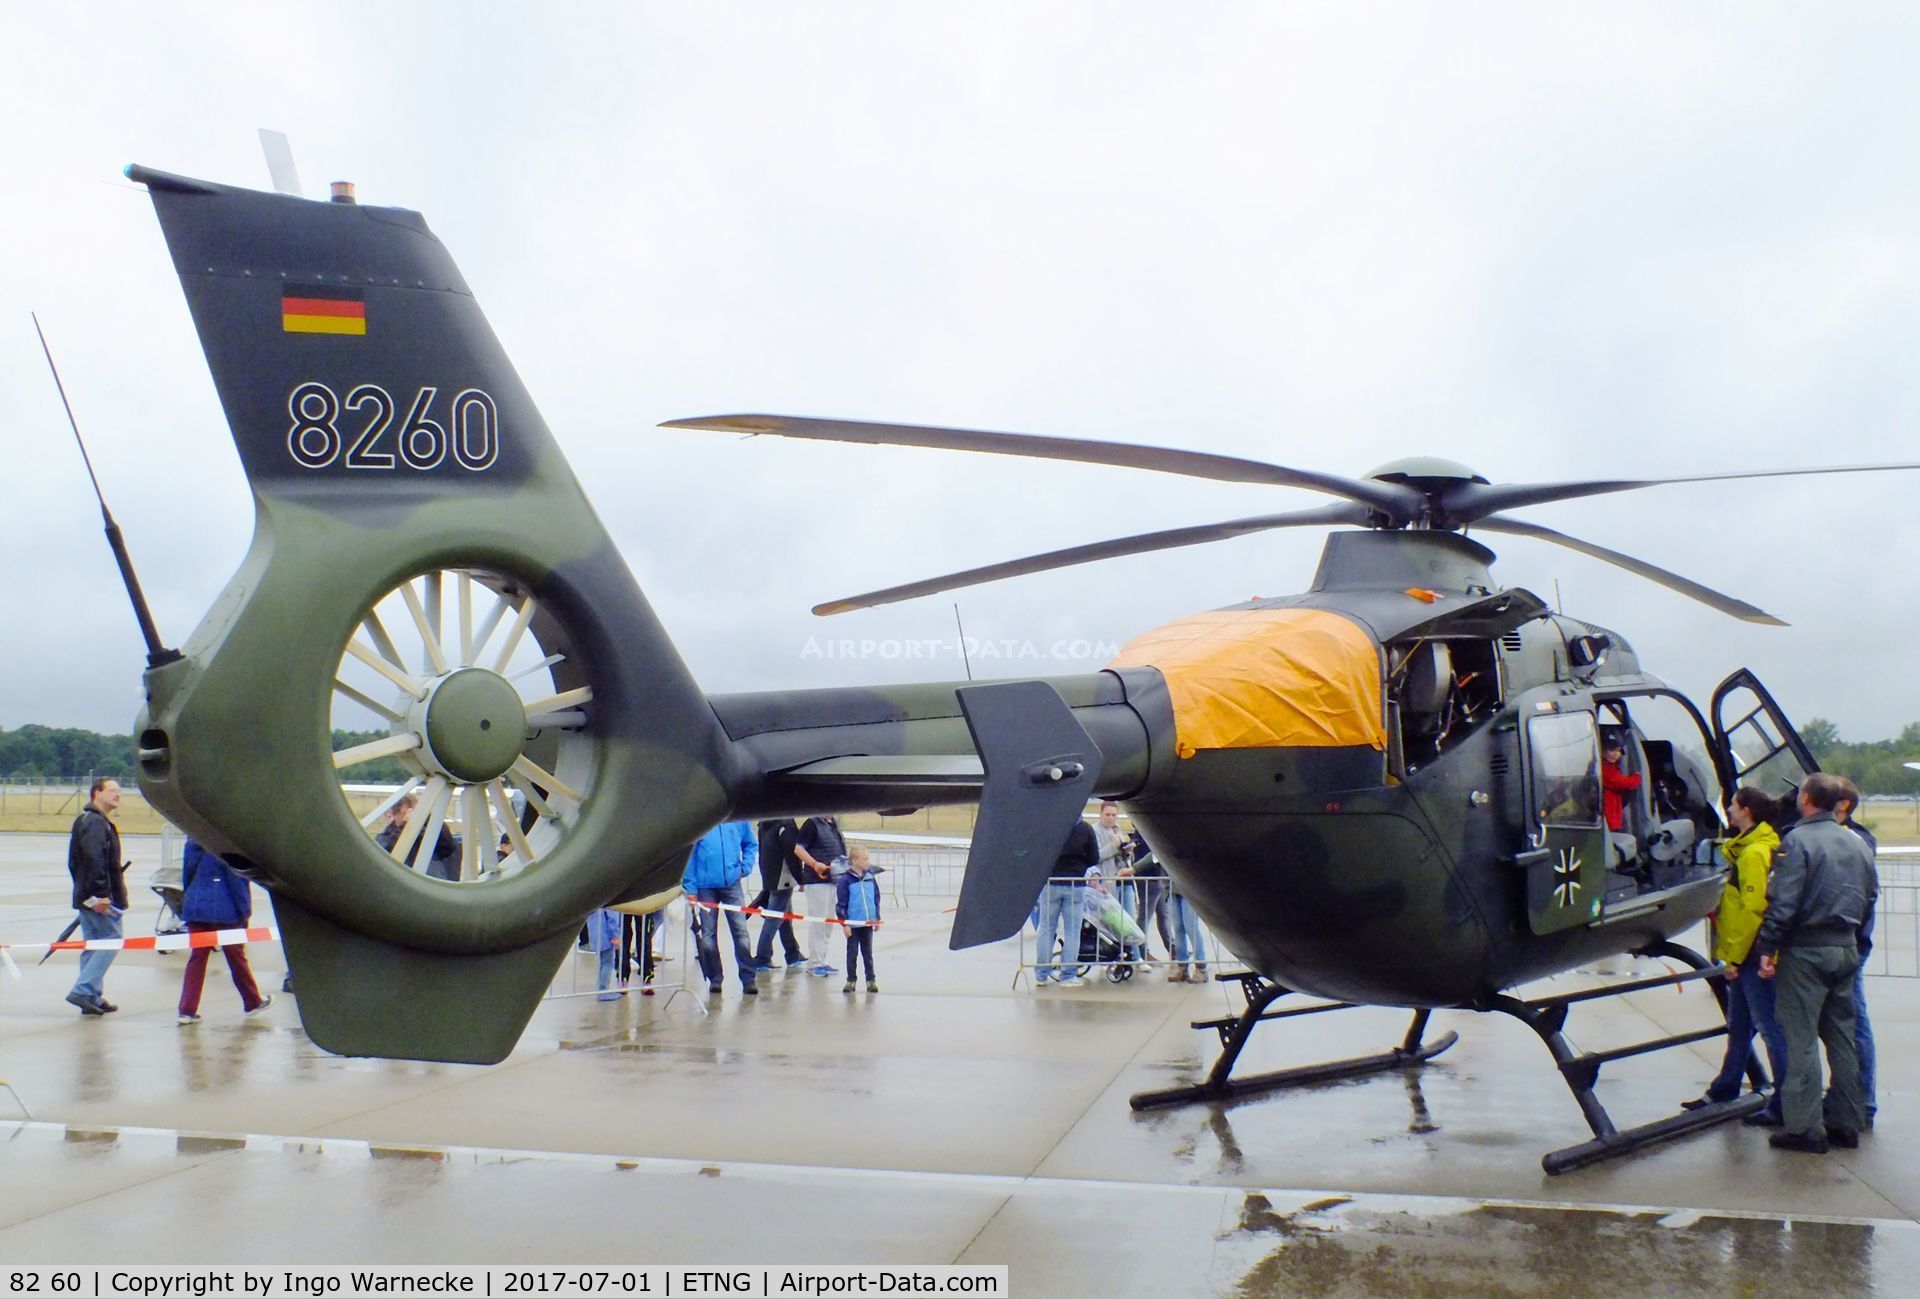 82 60, Eurocopter EC-135T-1 C/N 0111, Eurocopter EC135T-1 of the German Army Aviation at the NAEWF 35 years jubilee display Geilenkirchen 2017